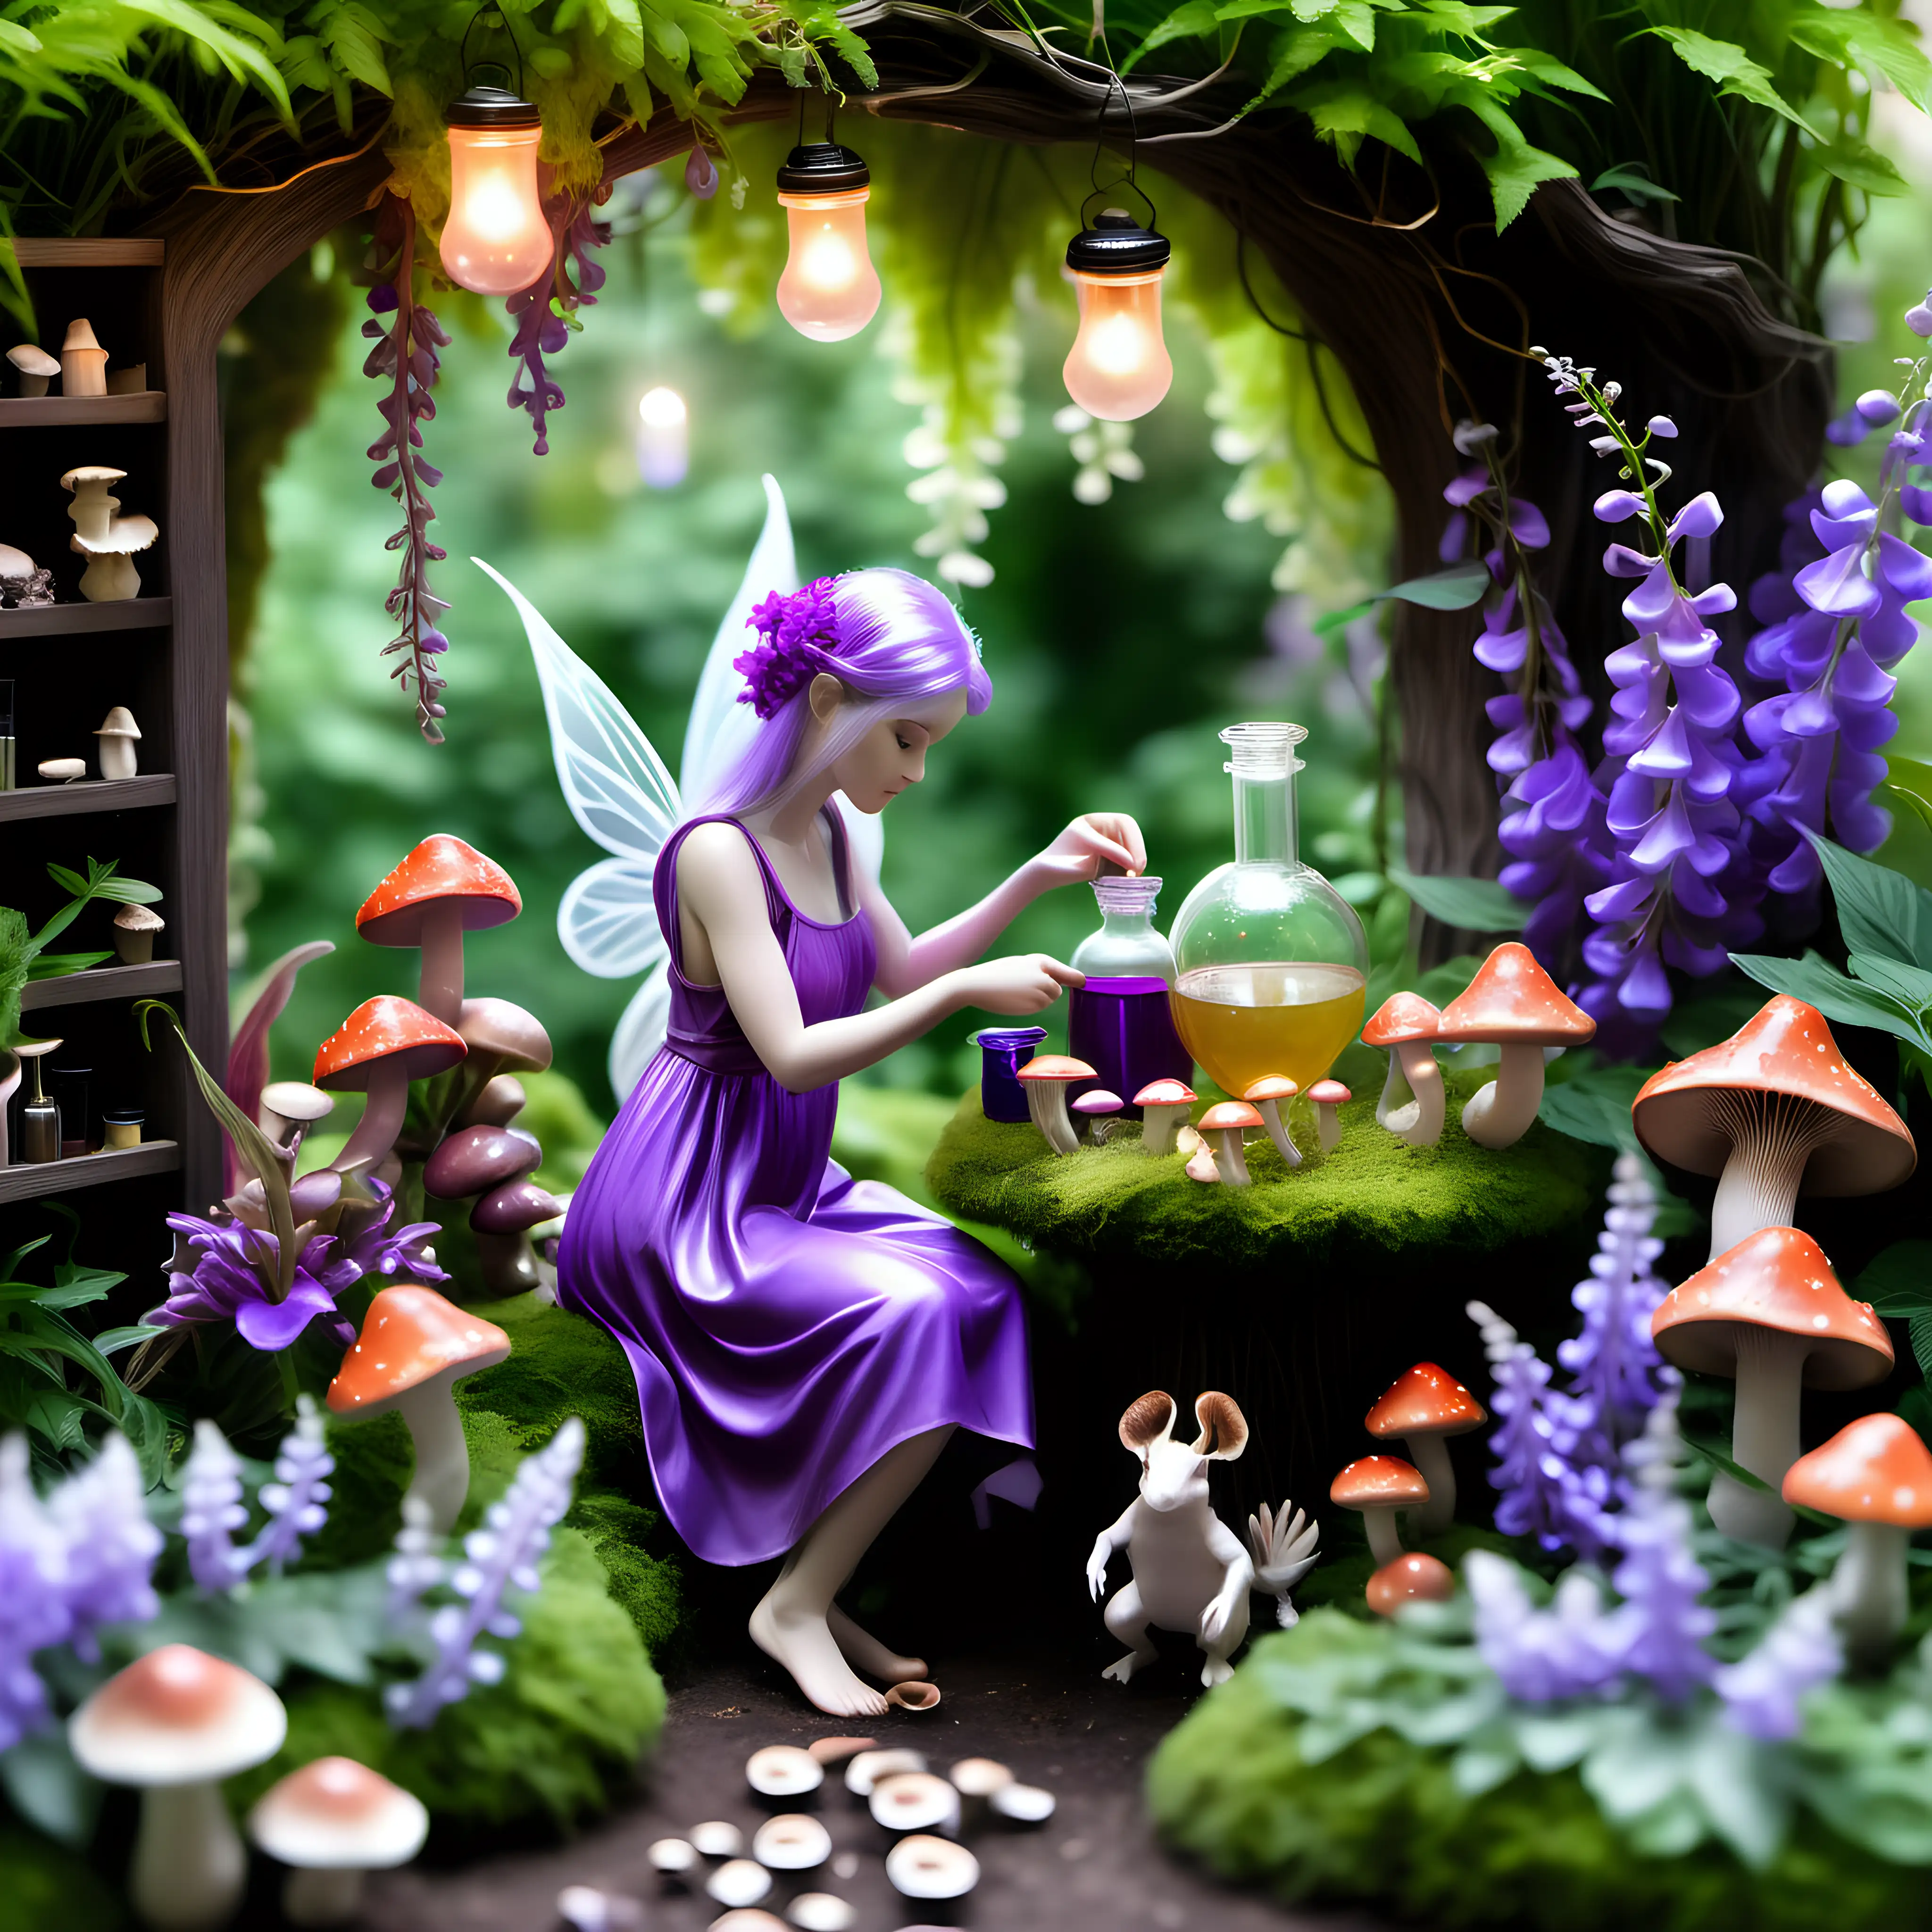 Enchanting Fairy Creating Magical Potions in a Vibrant Garden with Snapdragons Wisteria and Mushrooms